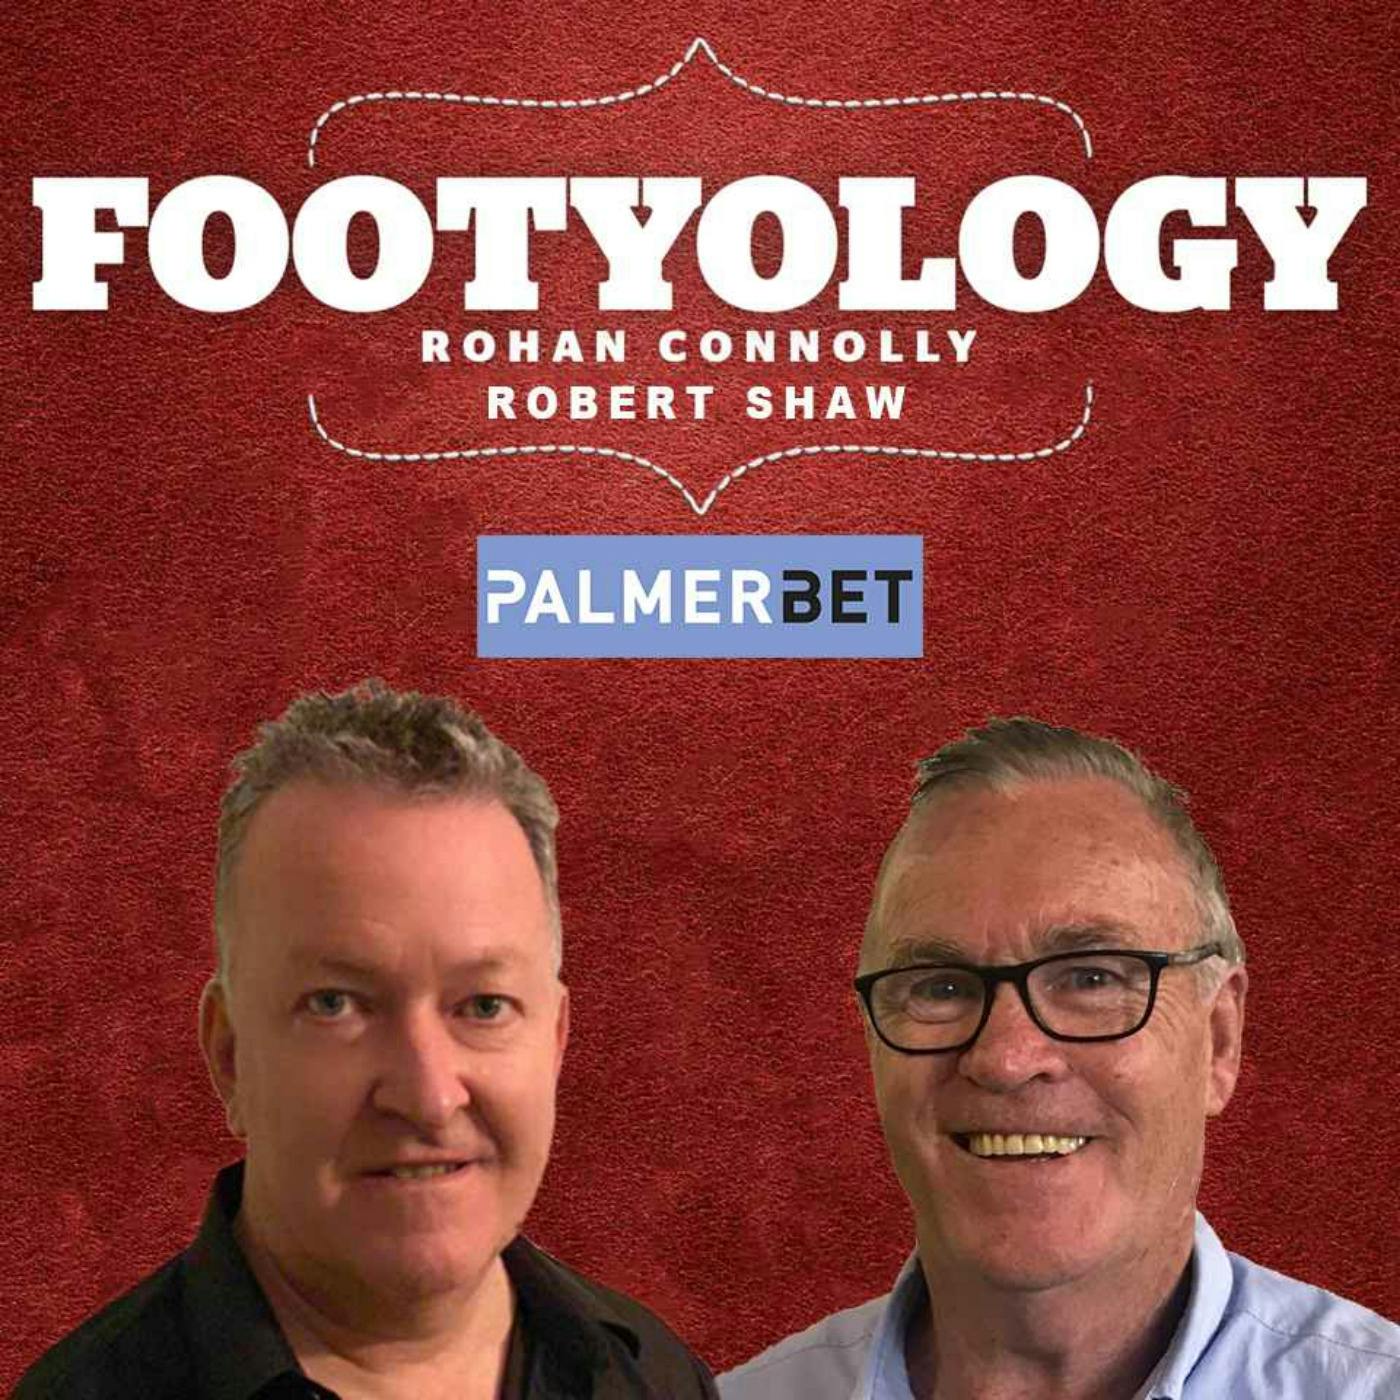 Footyology Podcast - June 22nd 2022